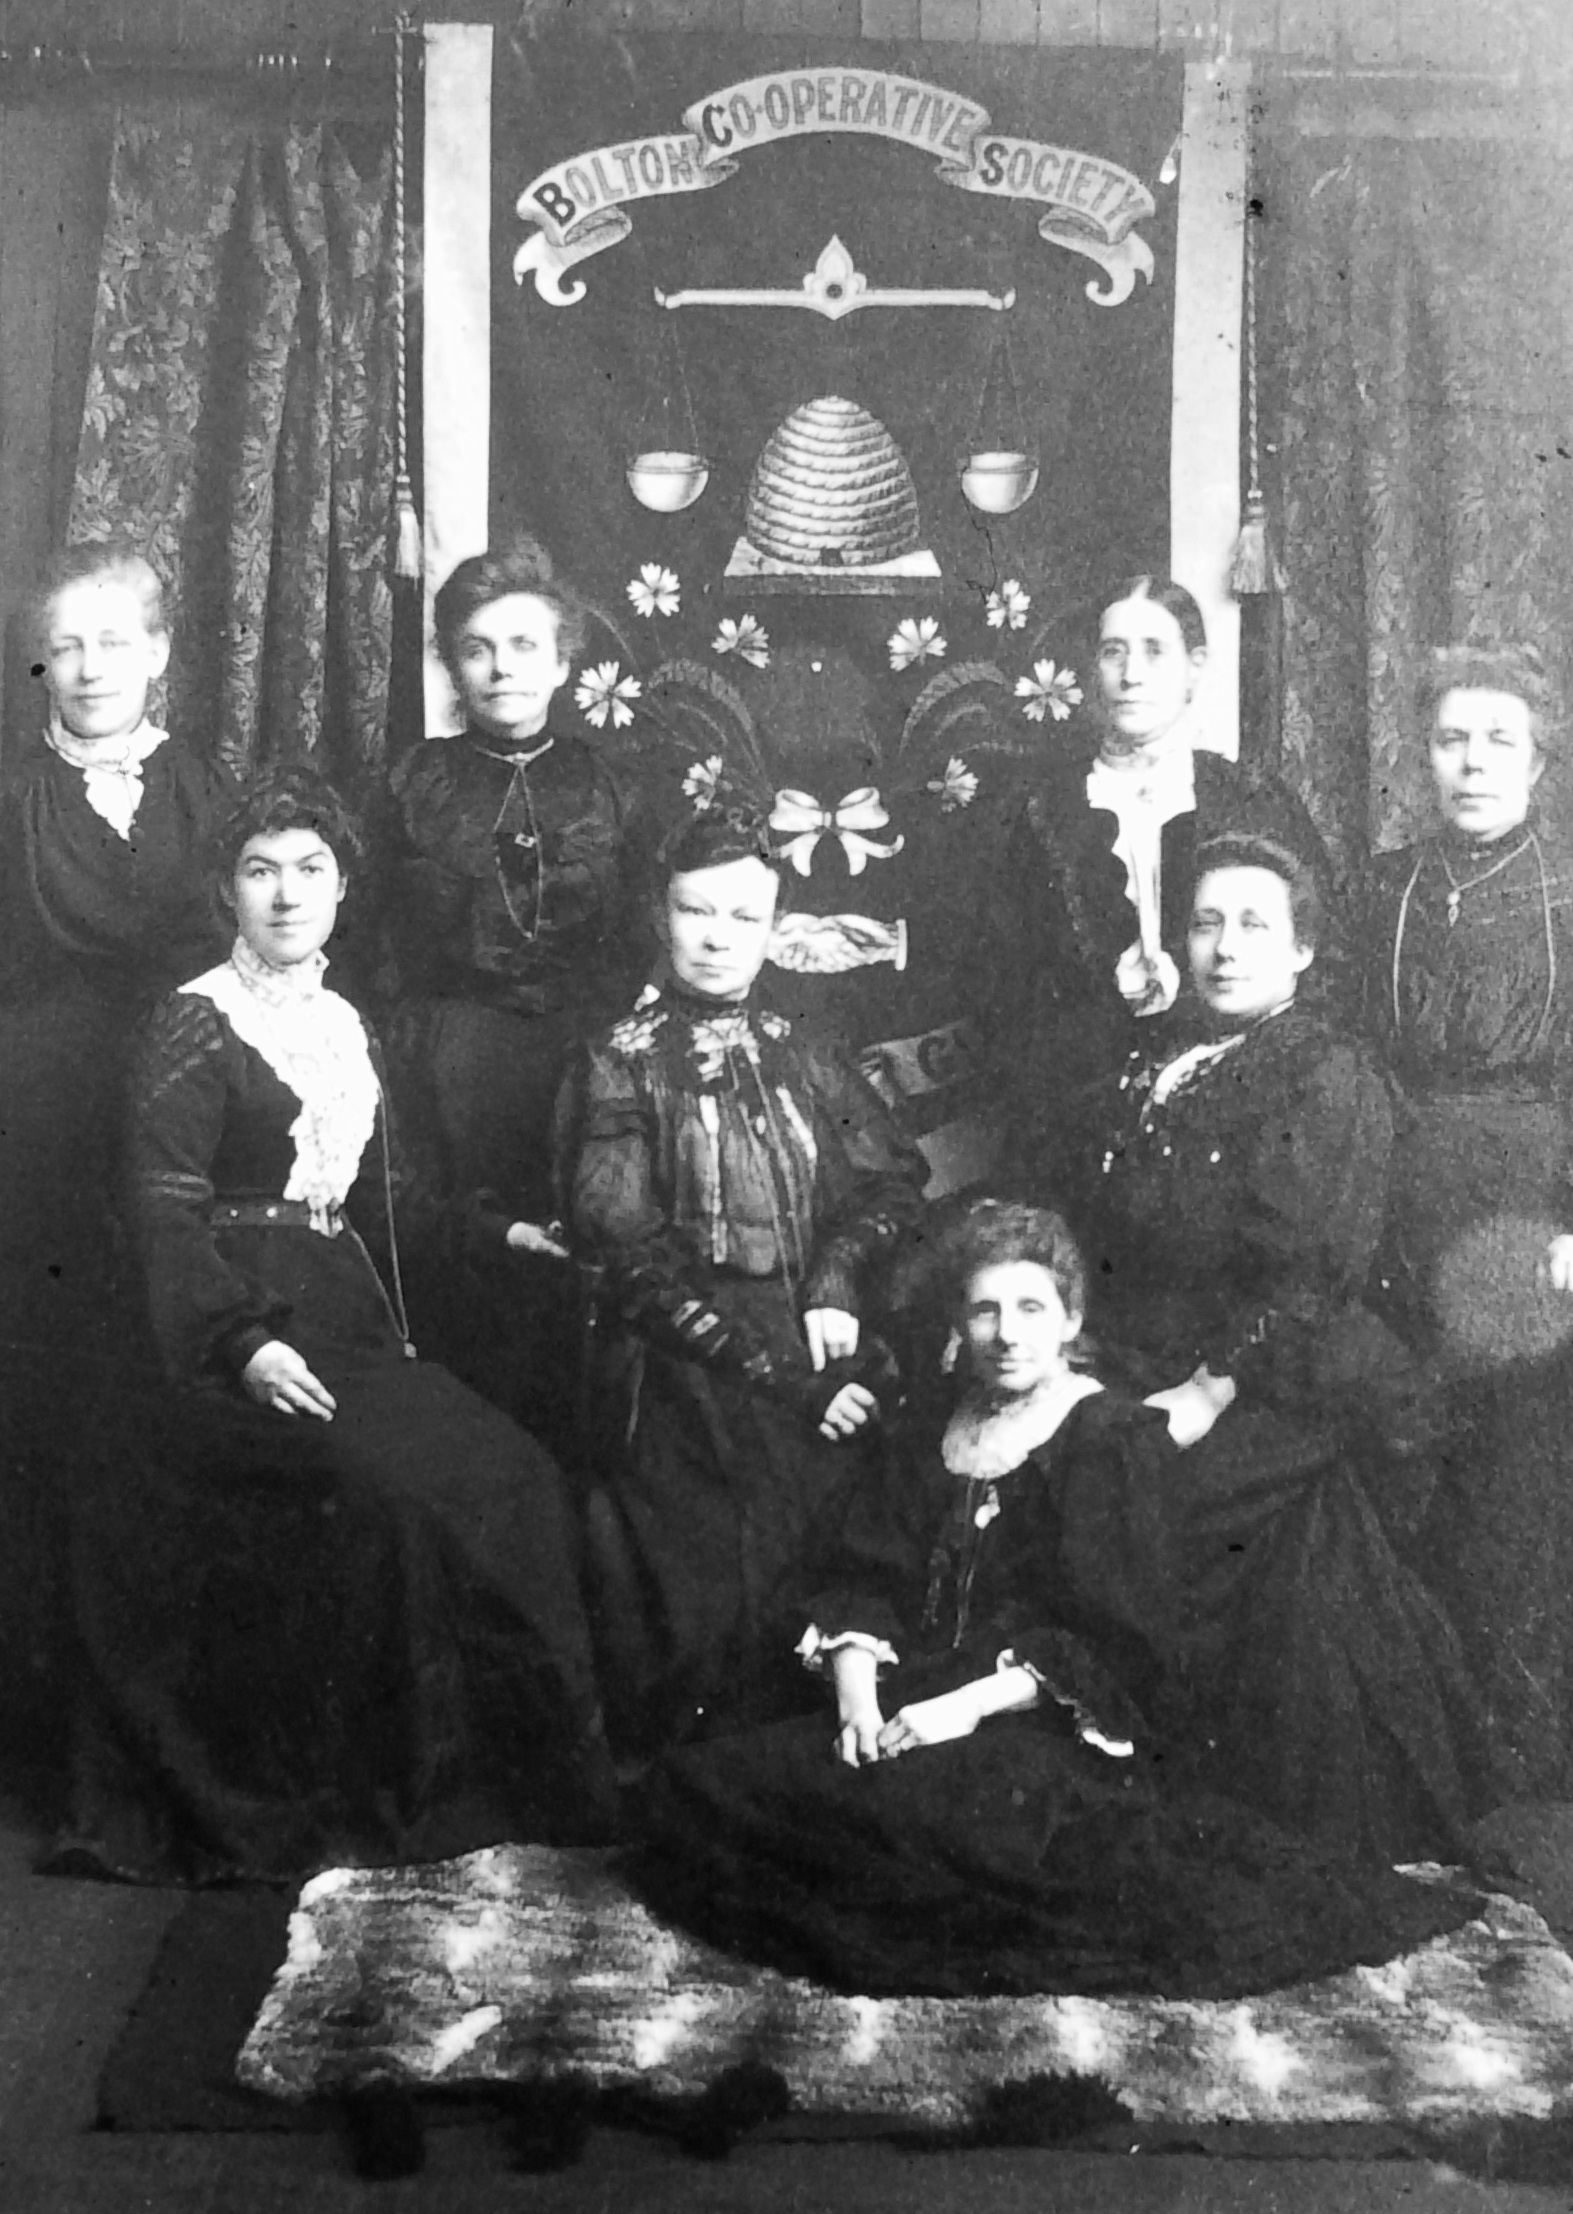 Sarah Reddish (centre) with the the Bolton Women’s Co-operative Guild around 1900